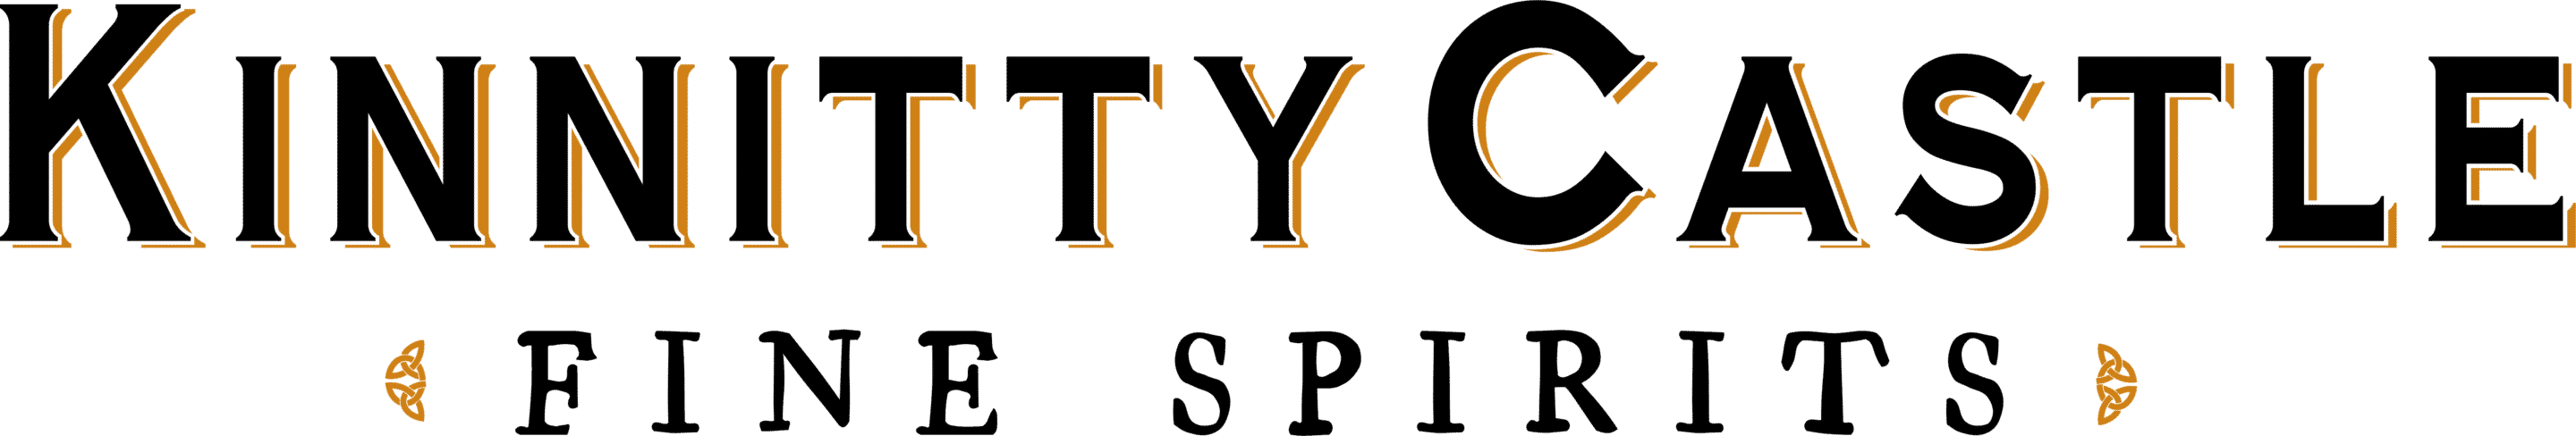 kinnitty castle spirits logo type with black and orange text that reads kinnitty castle fine spirits